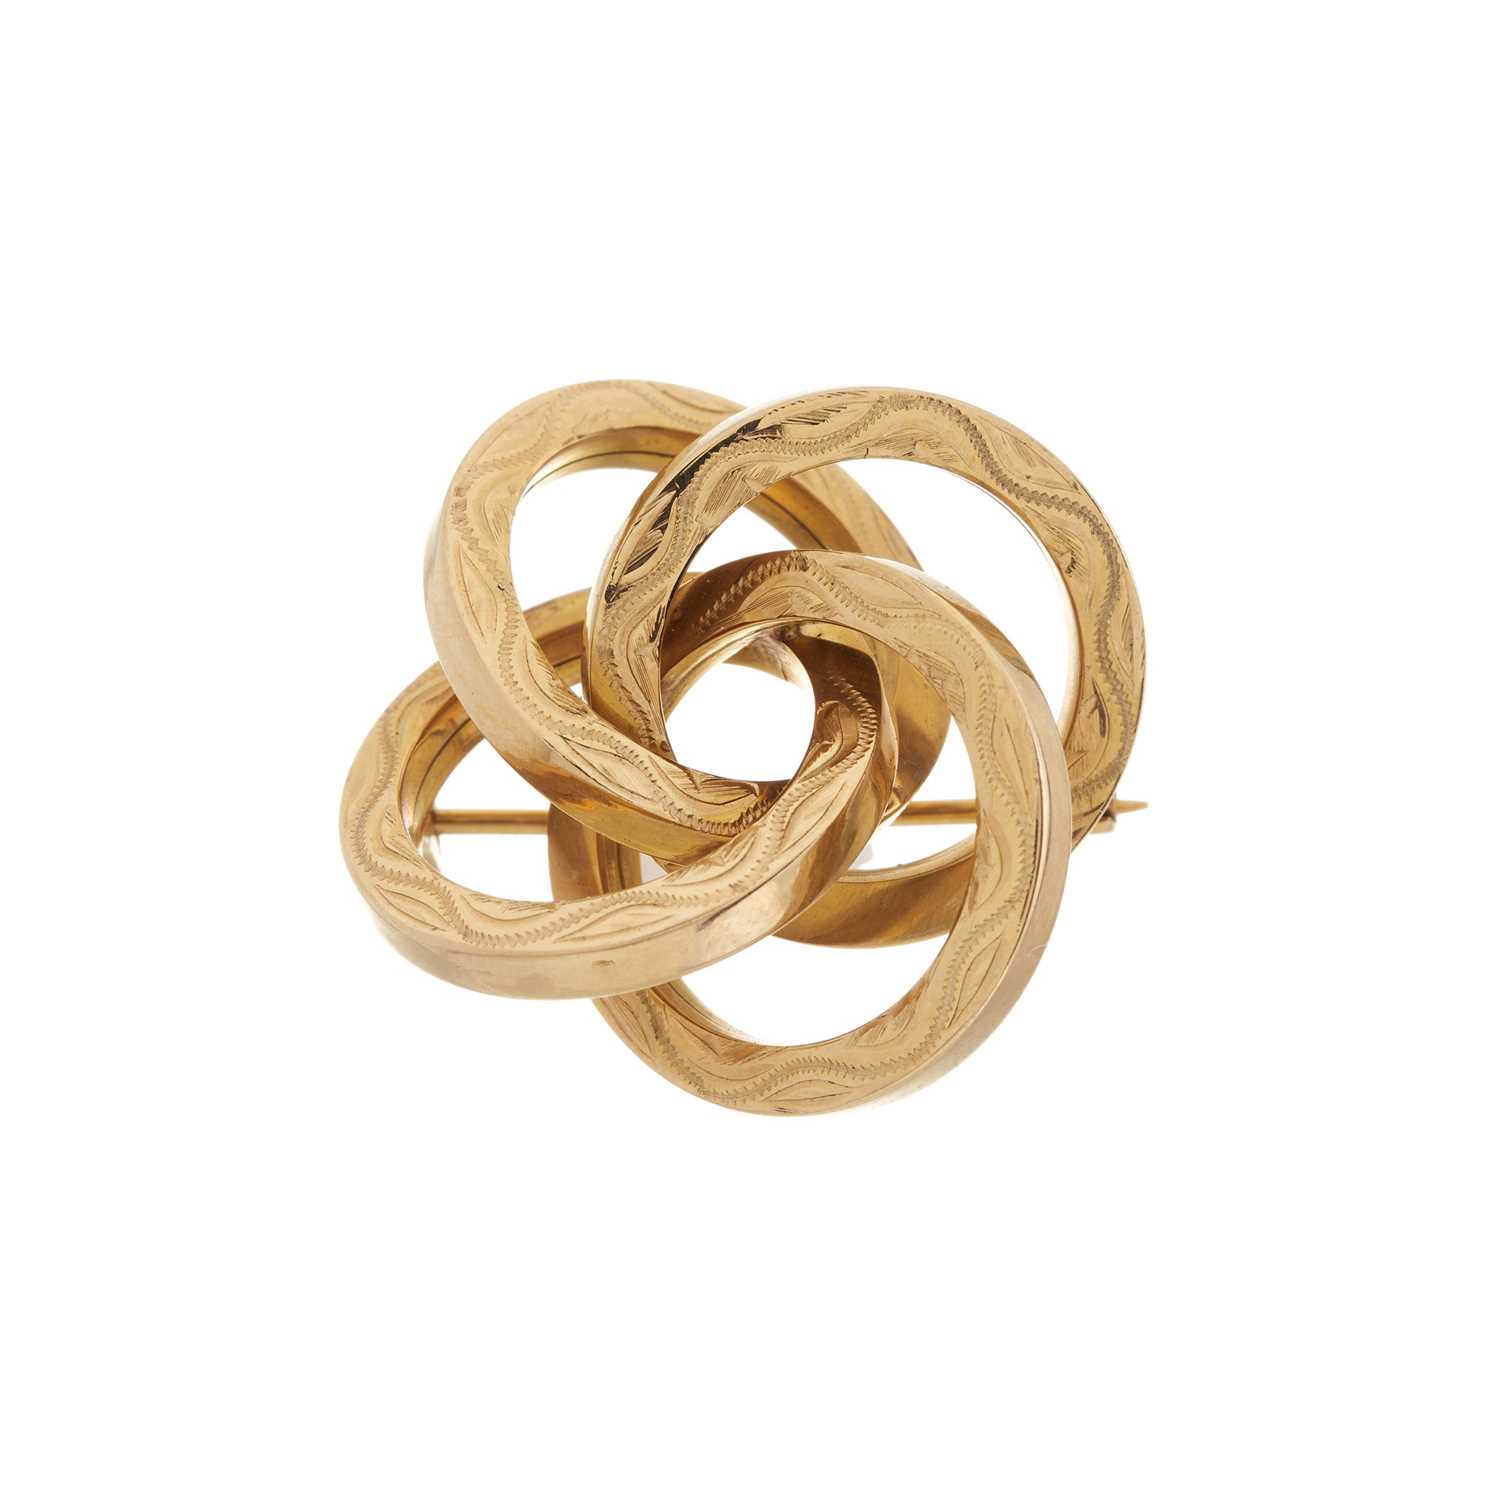 Lot 125 - A mid 20th century 18ct gold knot brooch